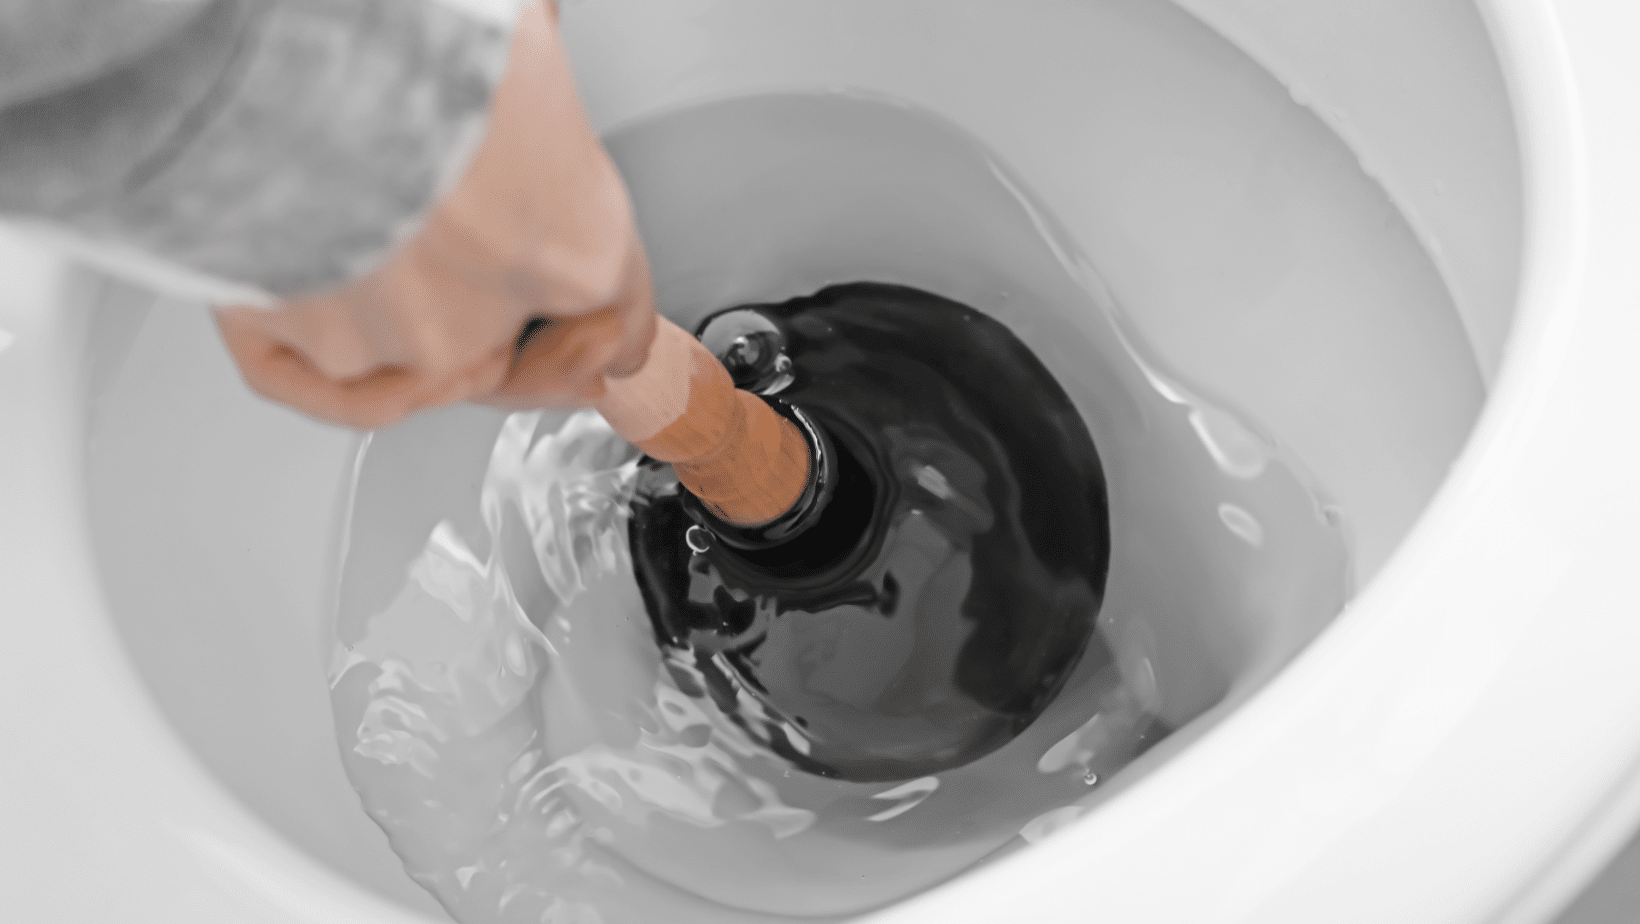 20 Easy Plumbing Hacks Anyone Can Try - Plumbing Outfitters